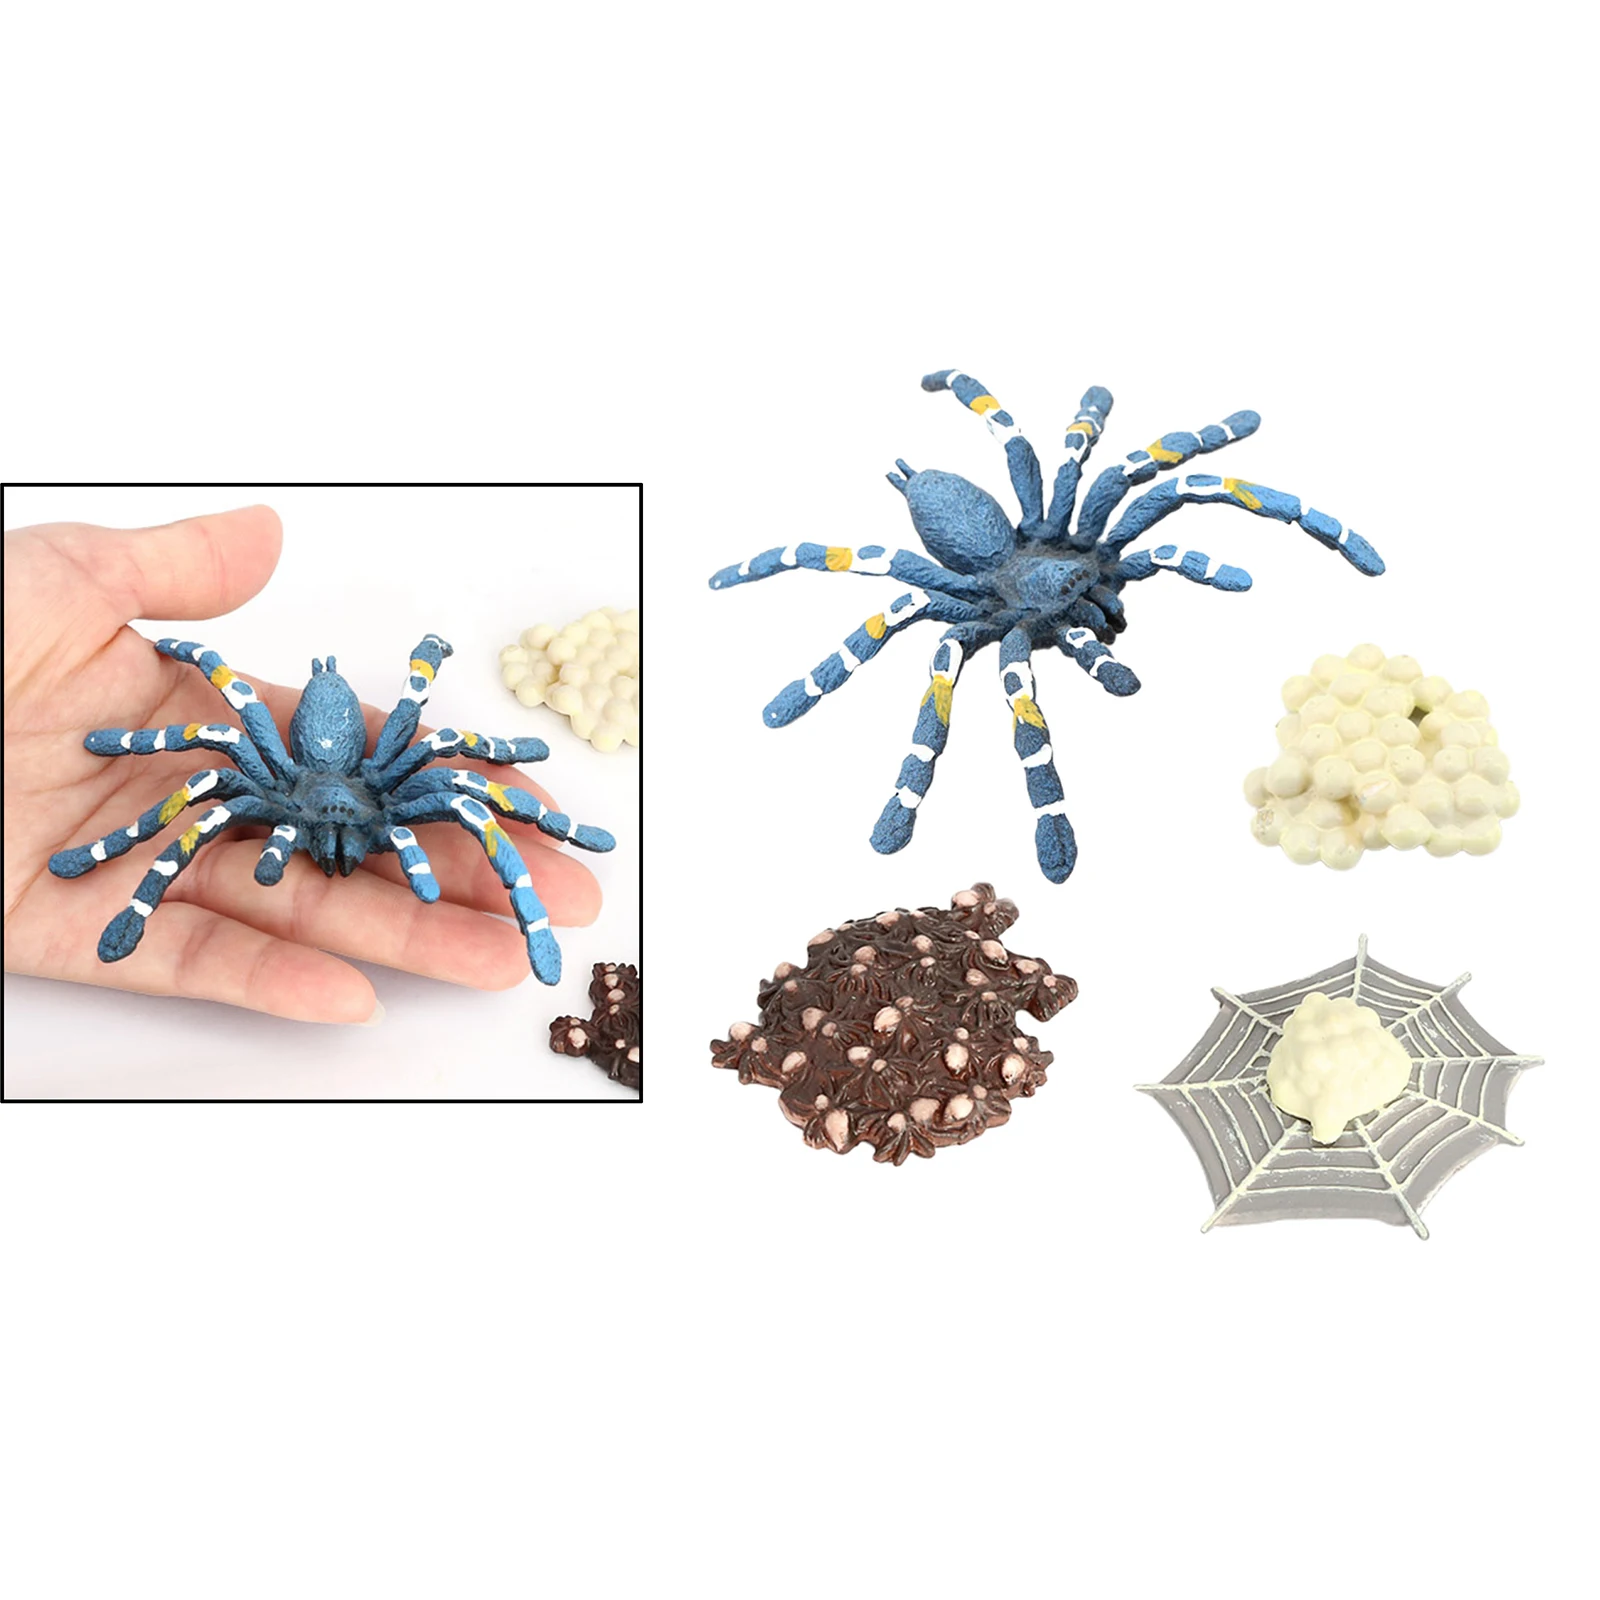 4Pcs Assorted Plastic Insects Bird Eating Spider Model Kids Educational Toy Blue